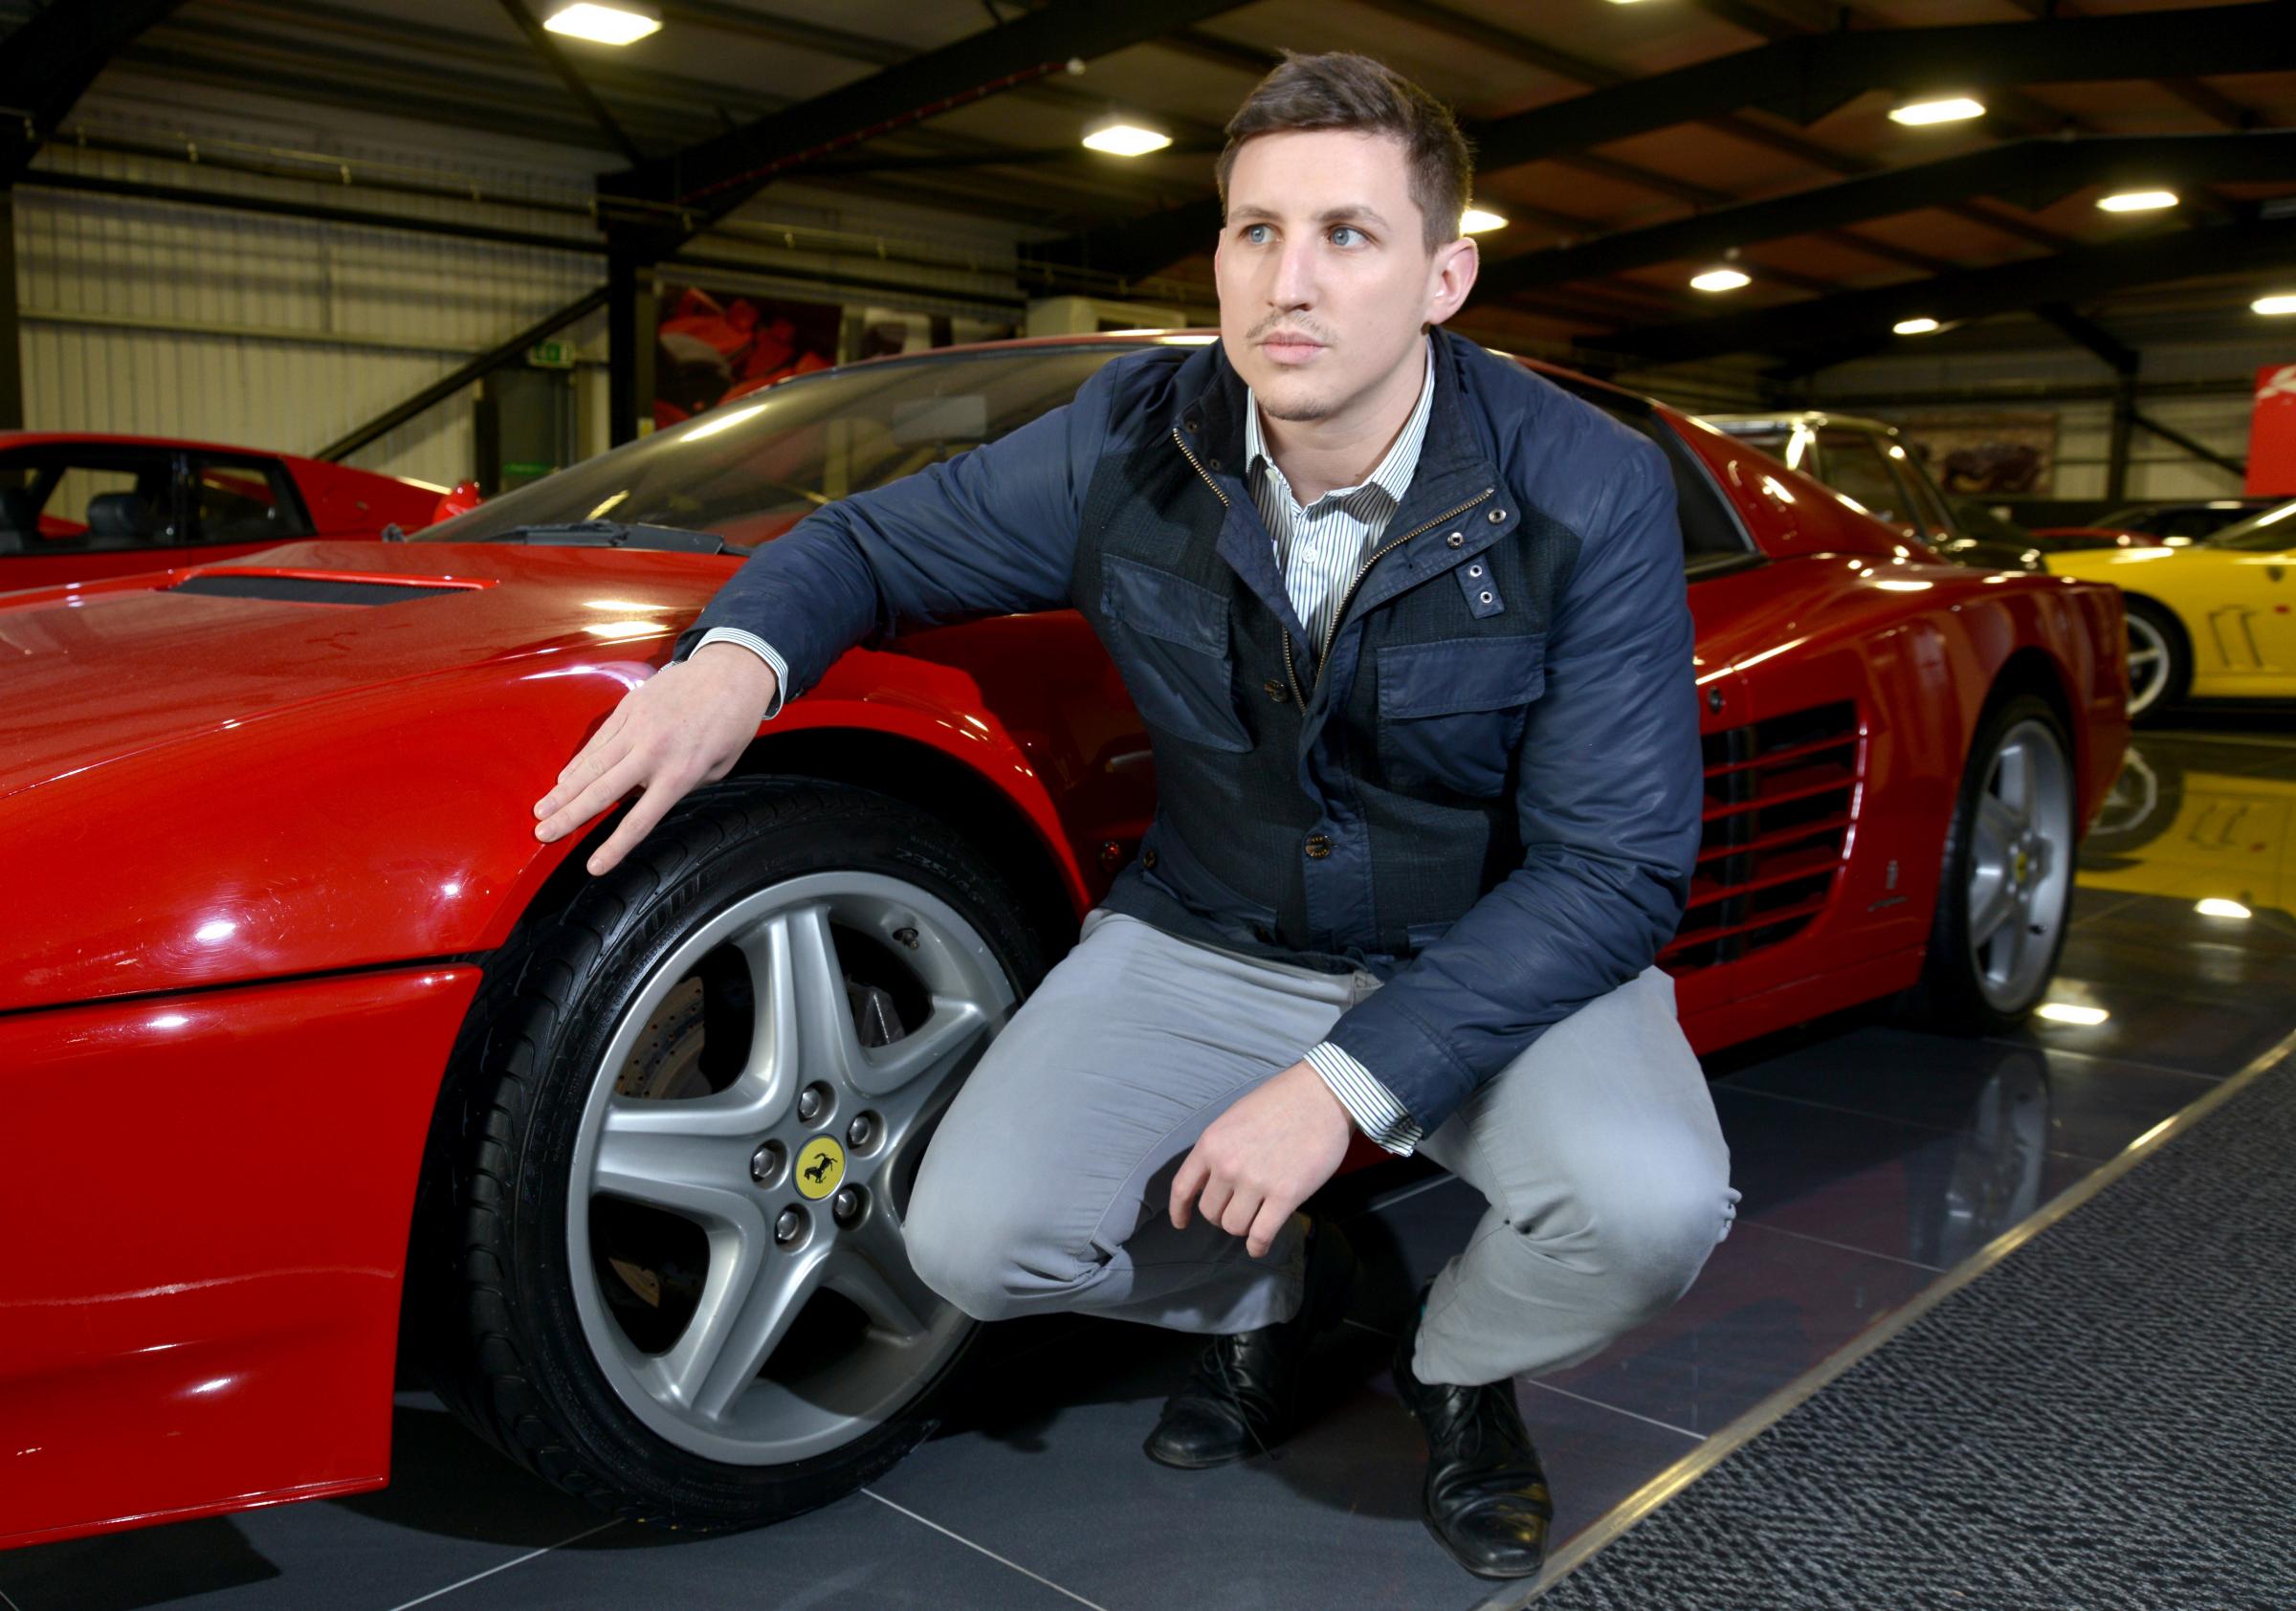 VIDEO: Firm specialising in high-performance vehicles backs fight against dangerous driving